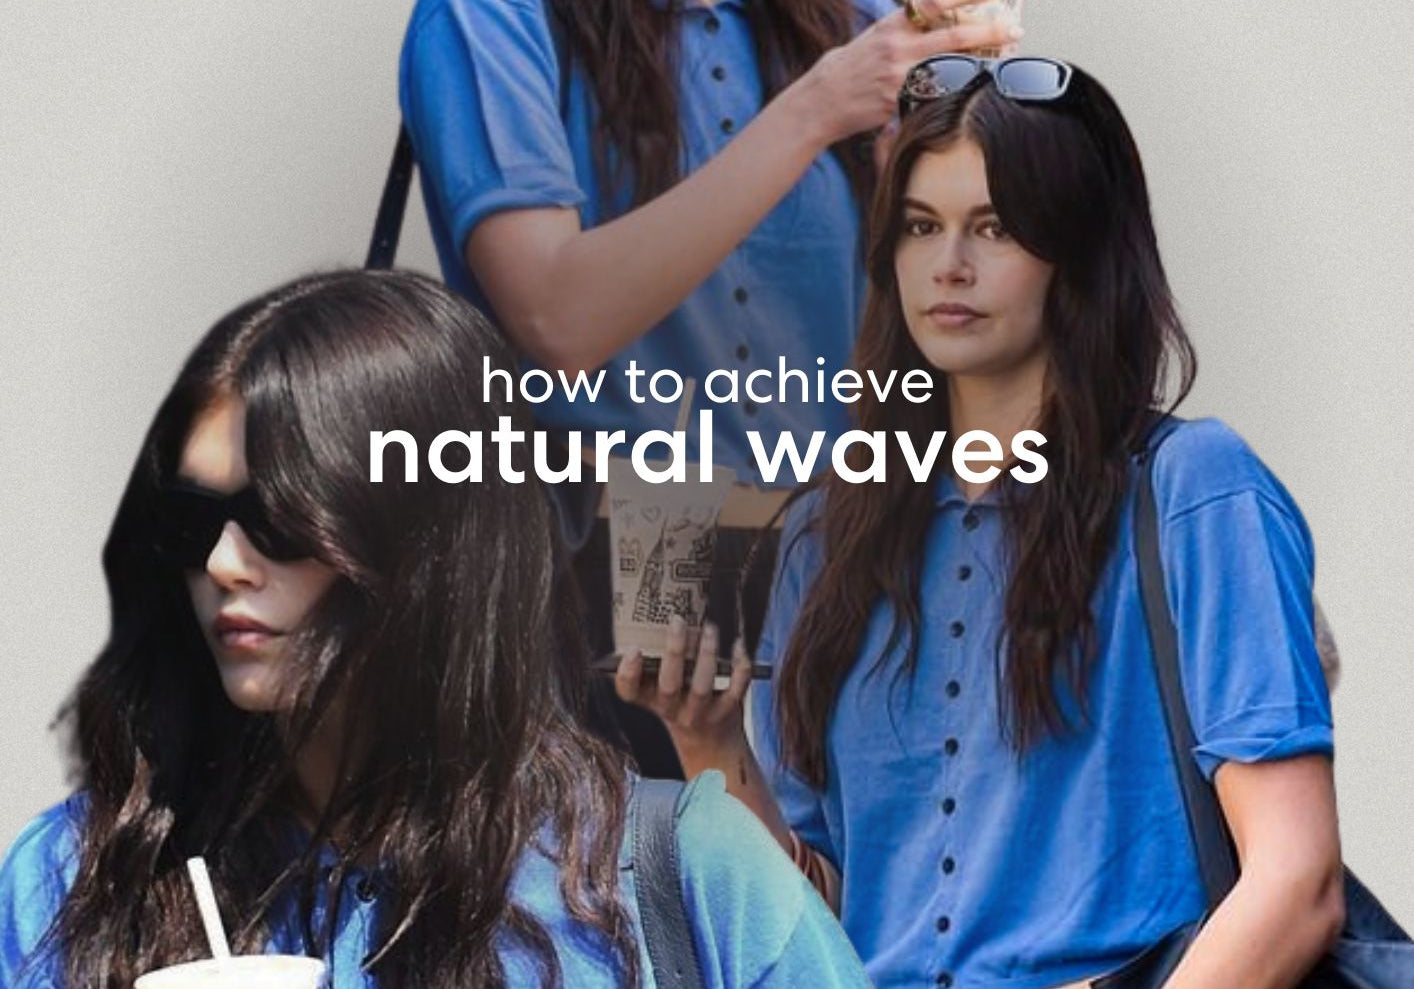 Kaia Gerber’s natural waves couldn’t be easier to create